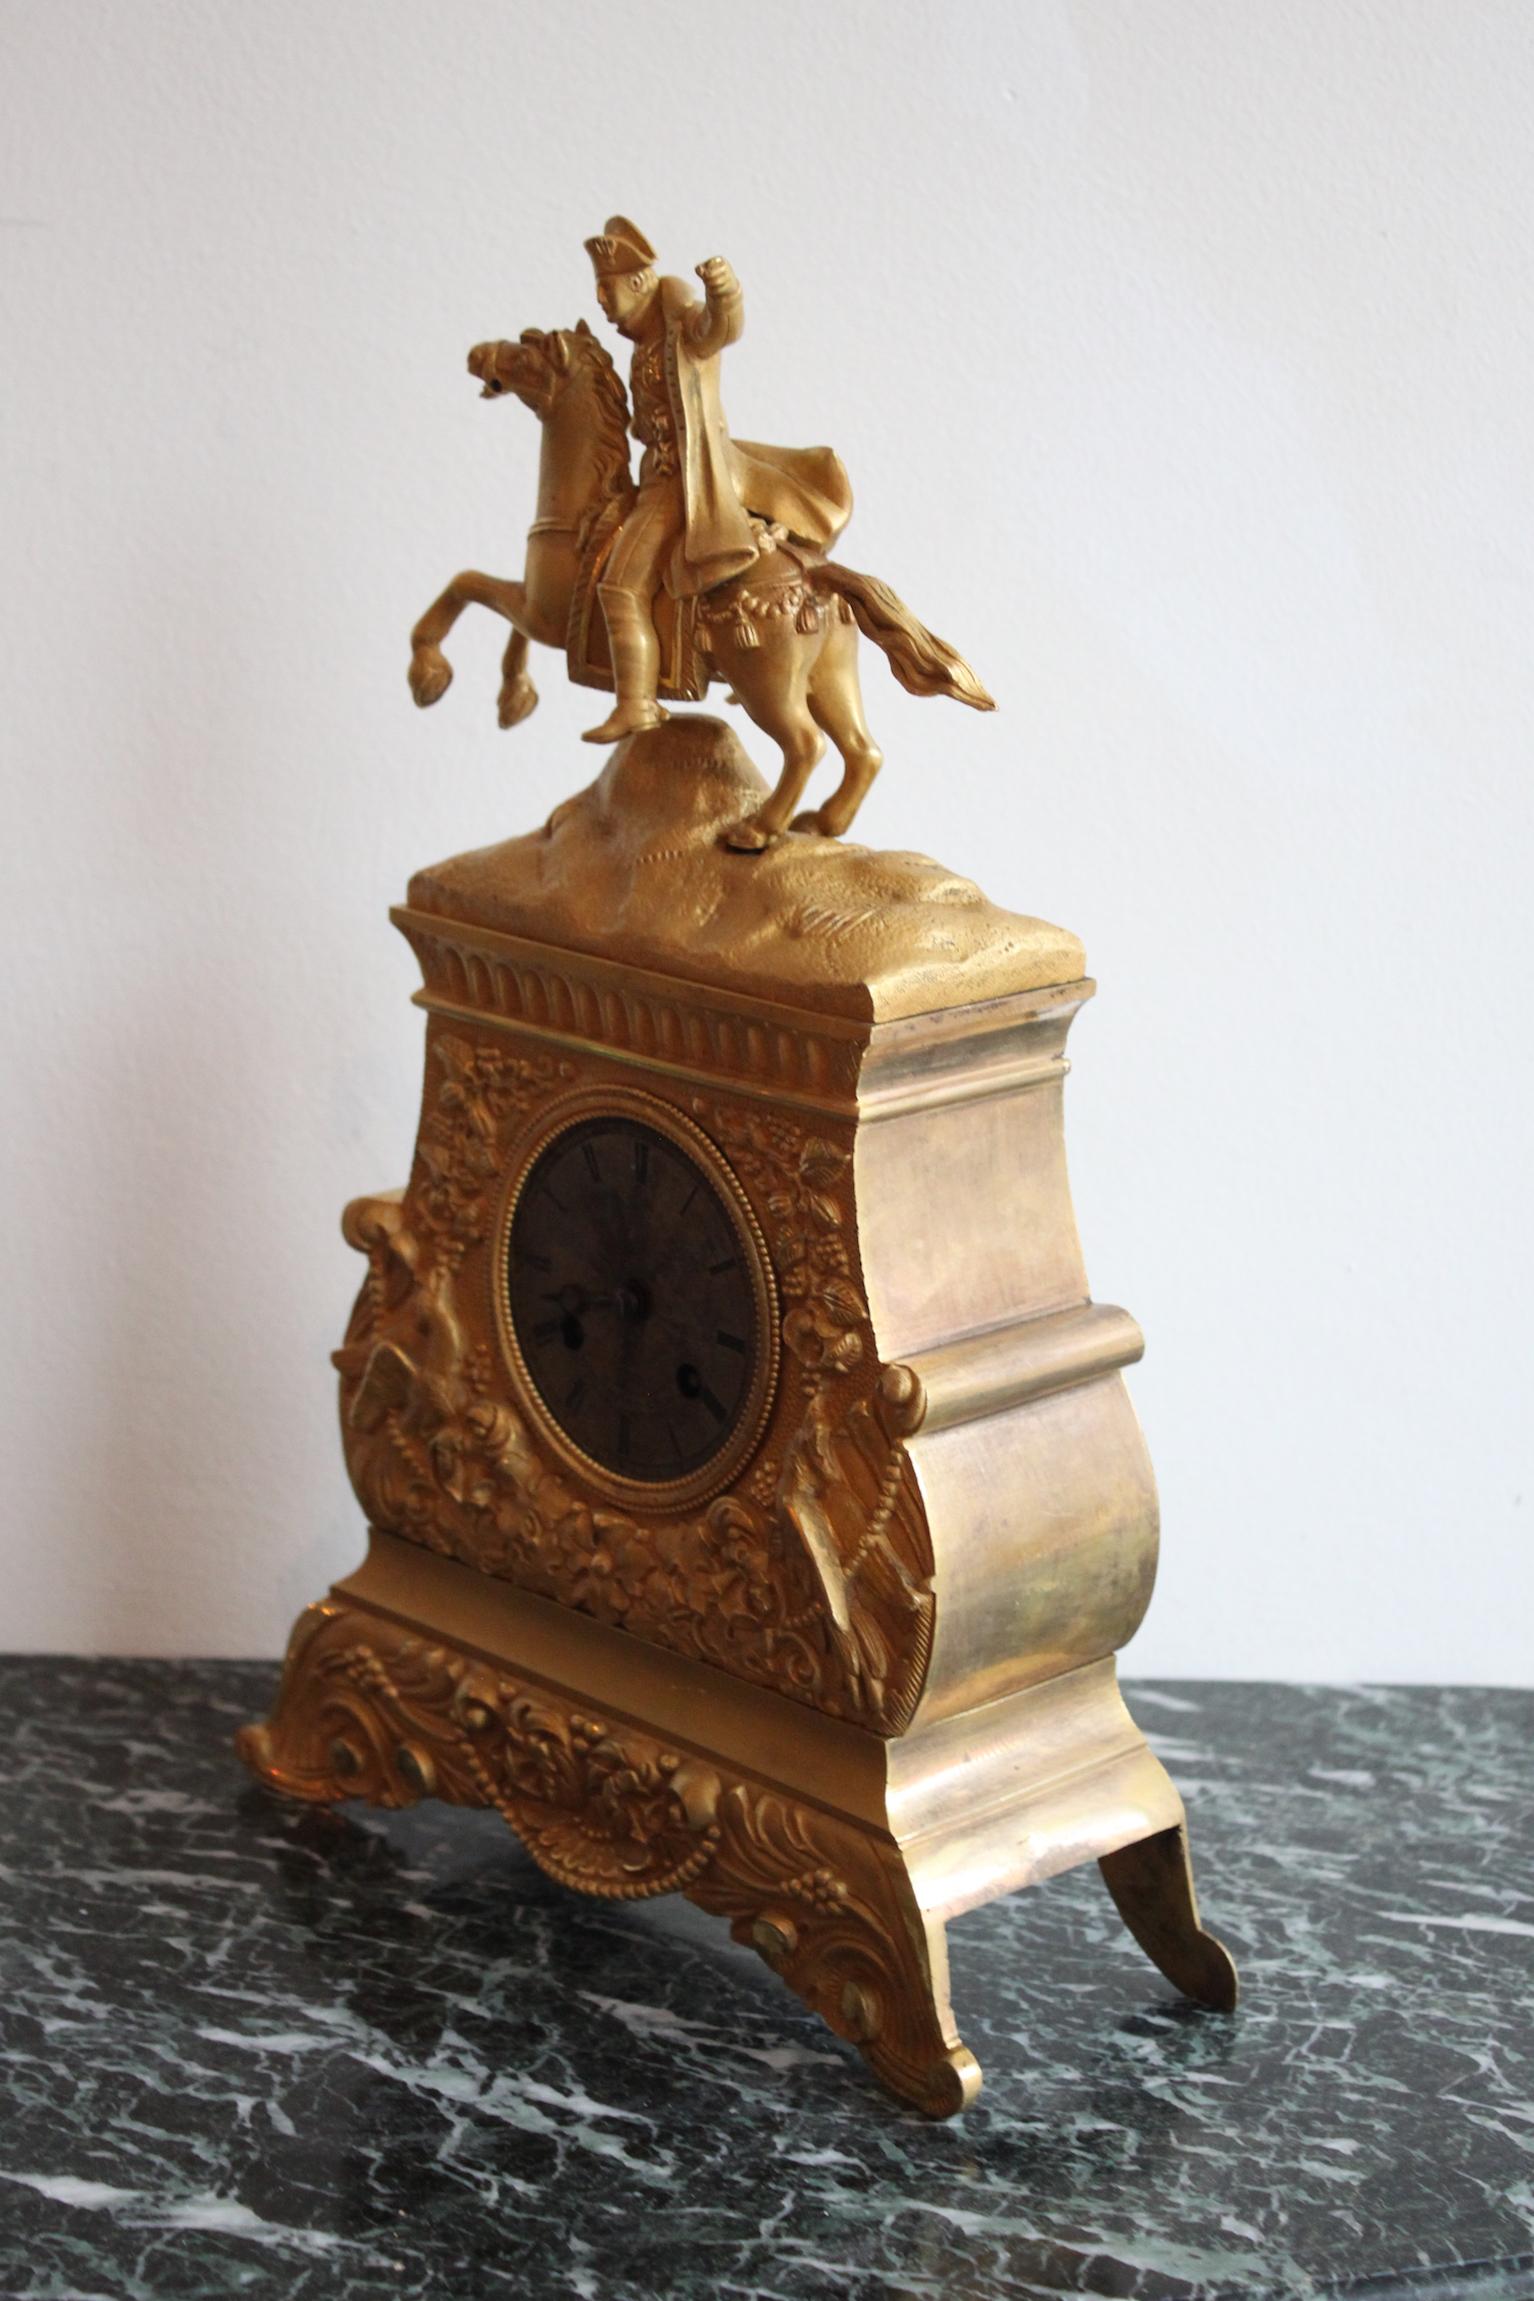 A 19th century gilt bronze Napoleon clock.
Movement needs revision but works.
Perfect condition.